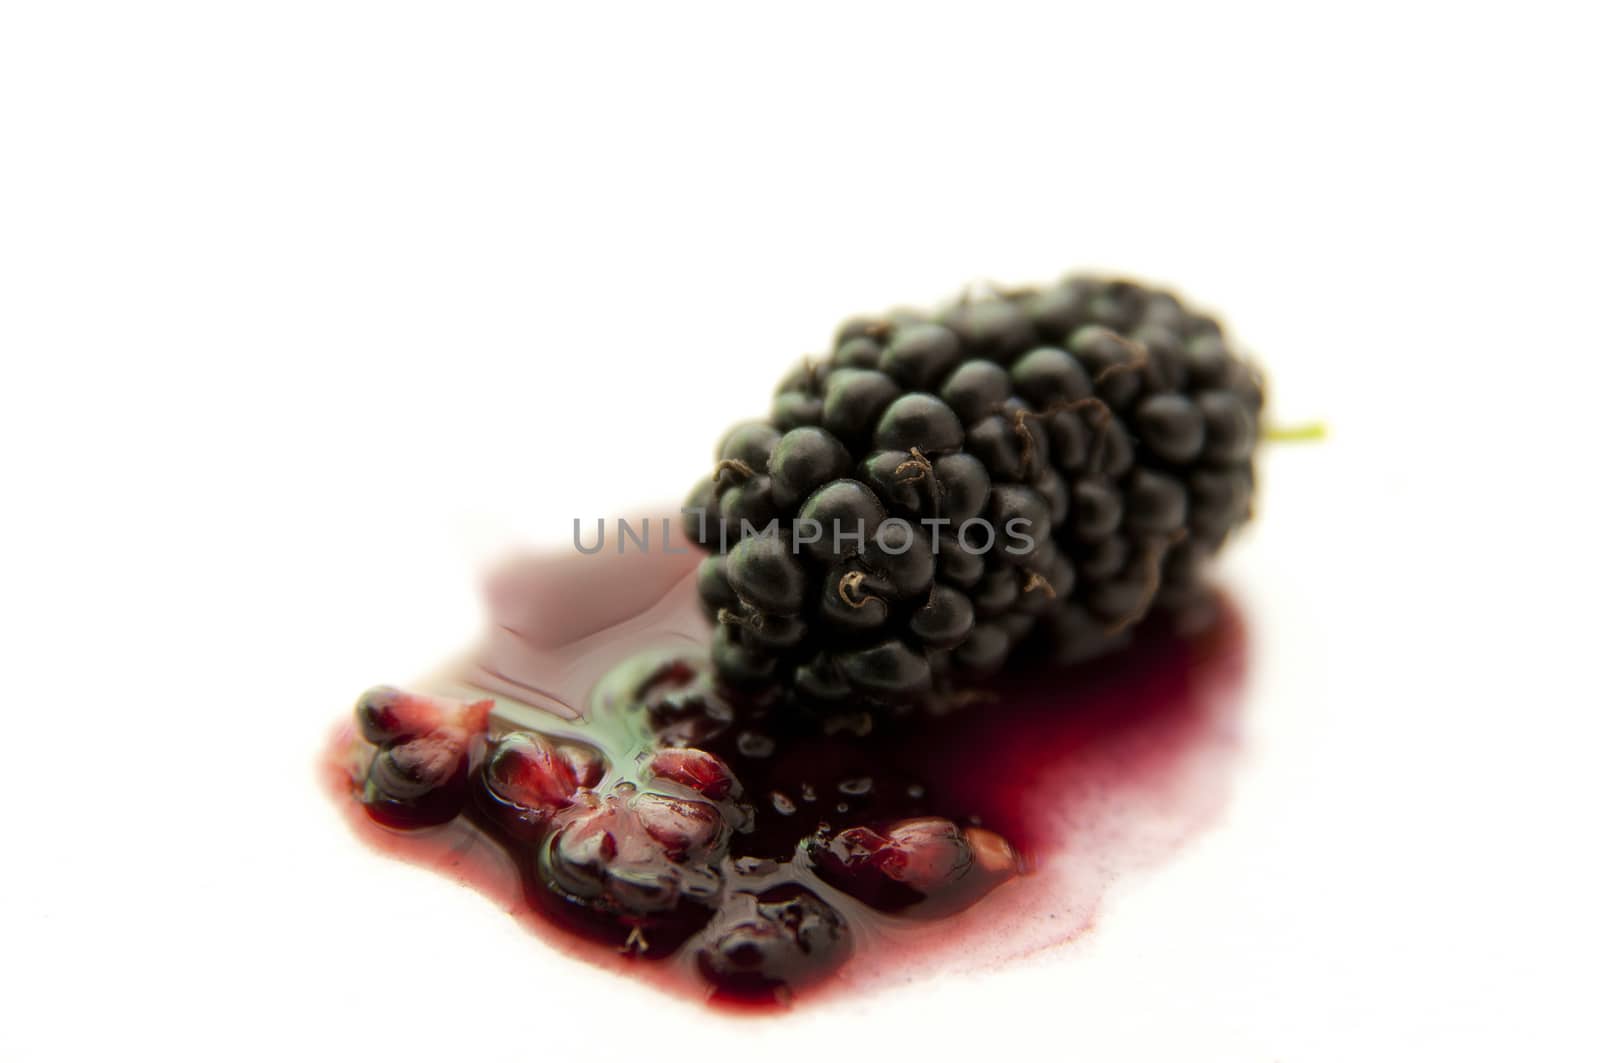 The blackberry is an edible fruit produced by many species